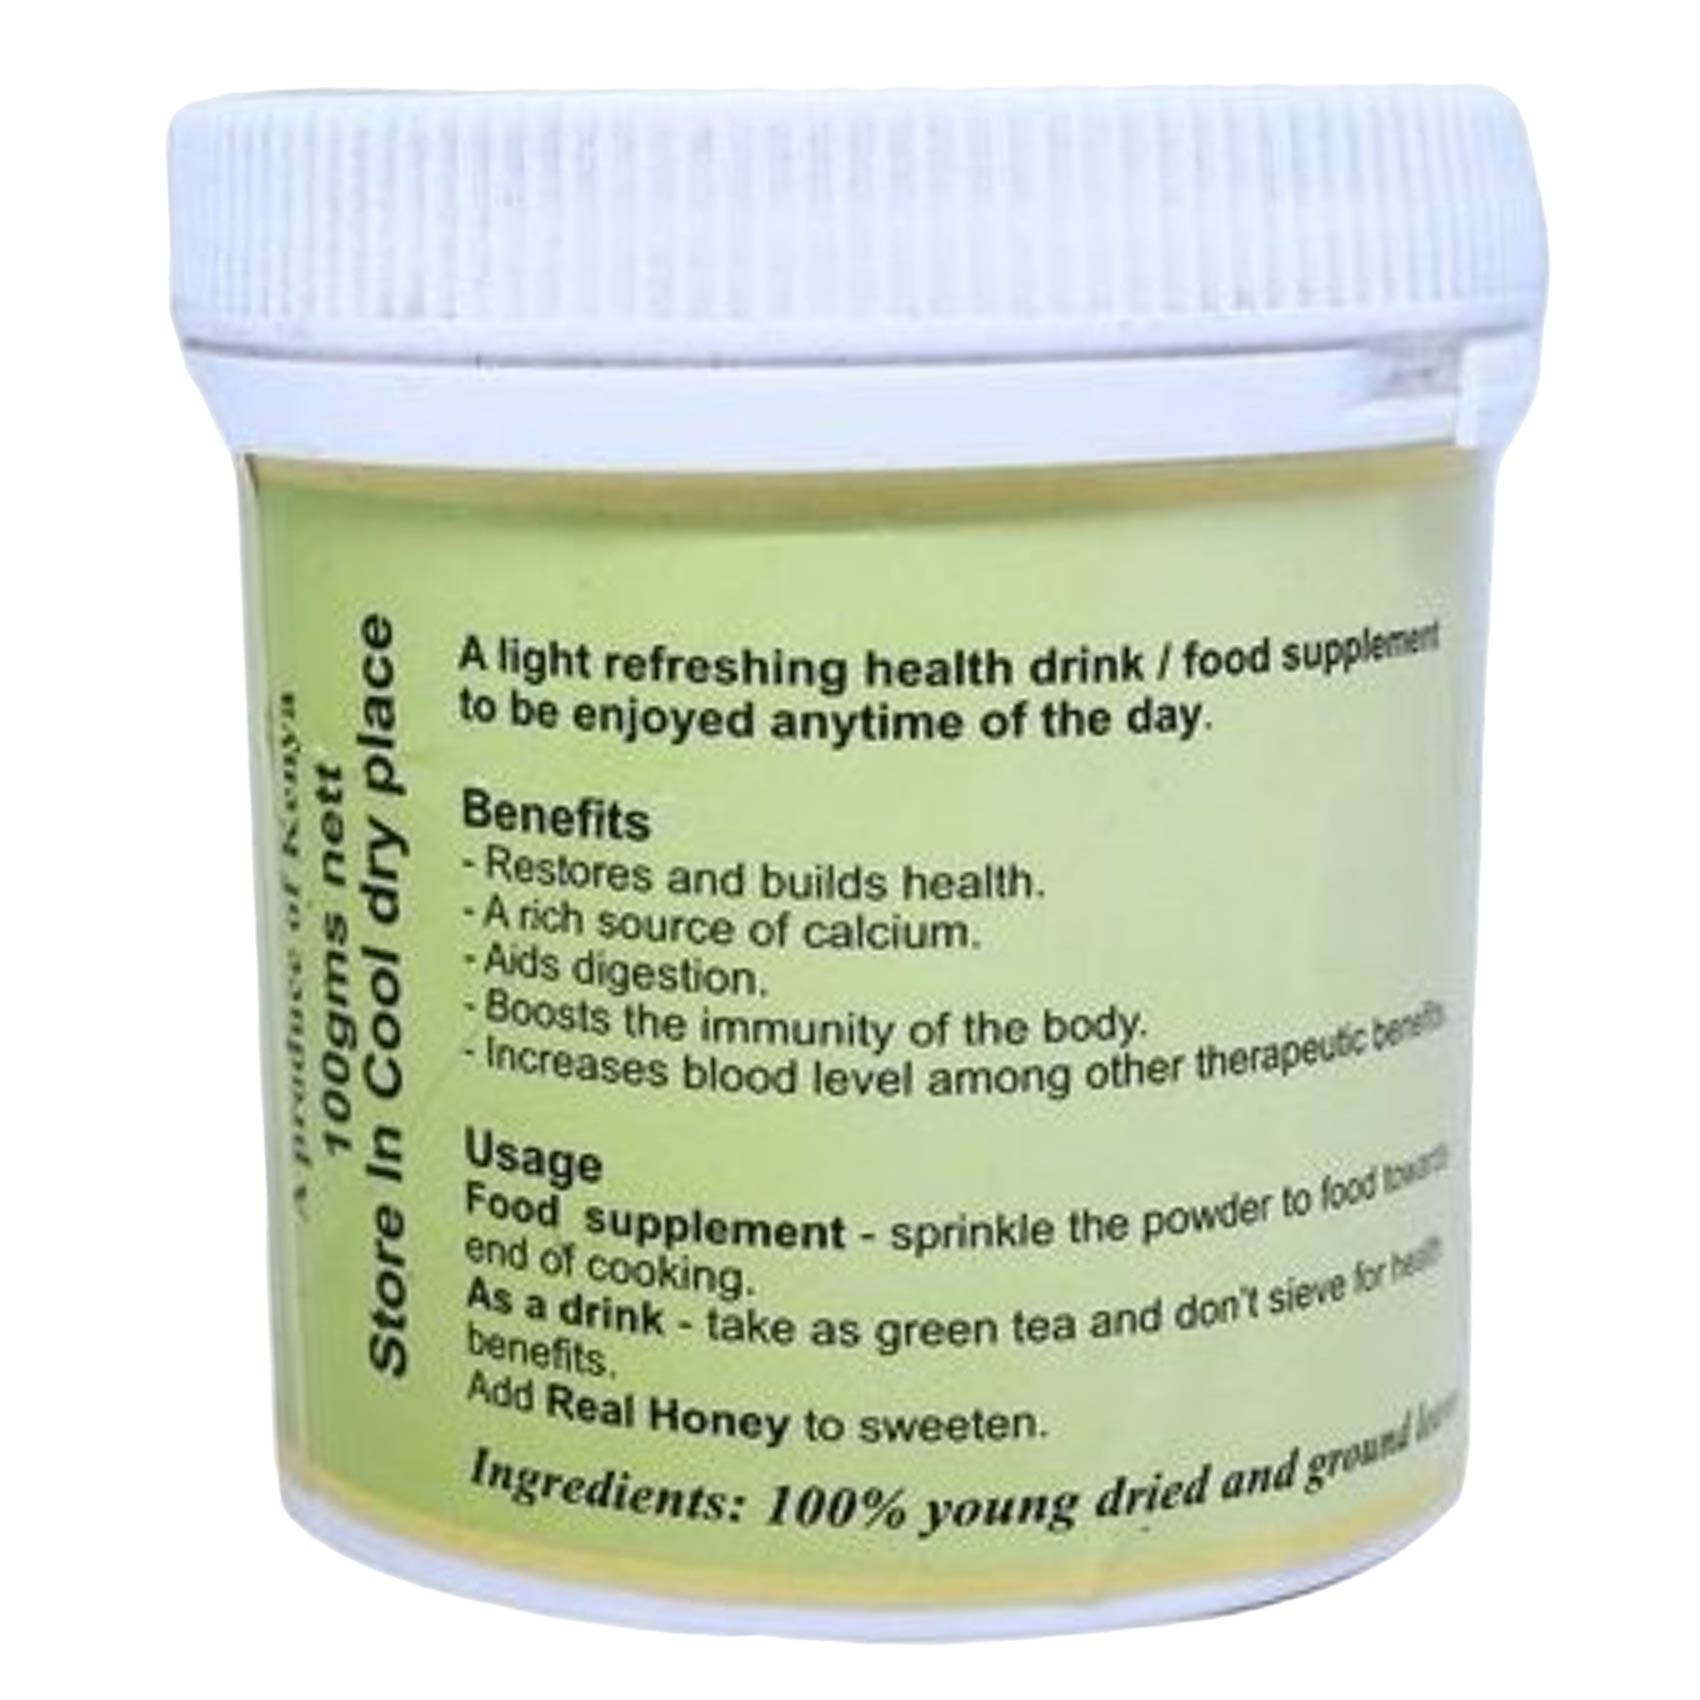 Equitorial Natural Health Stinging Nettle Powder 100g